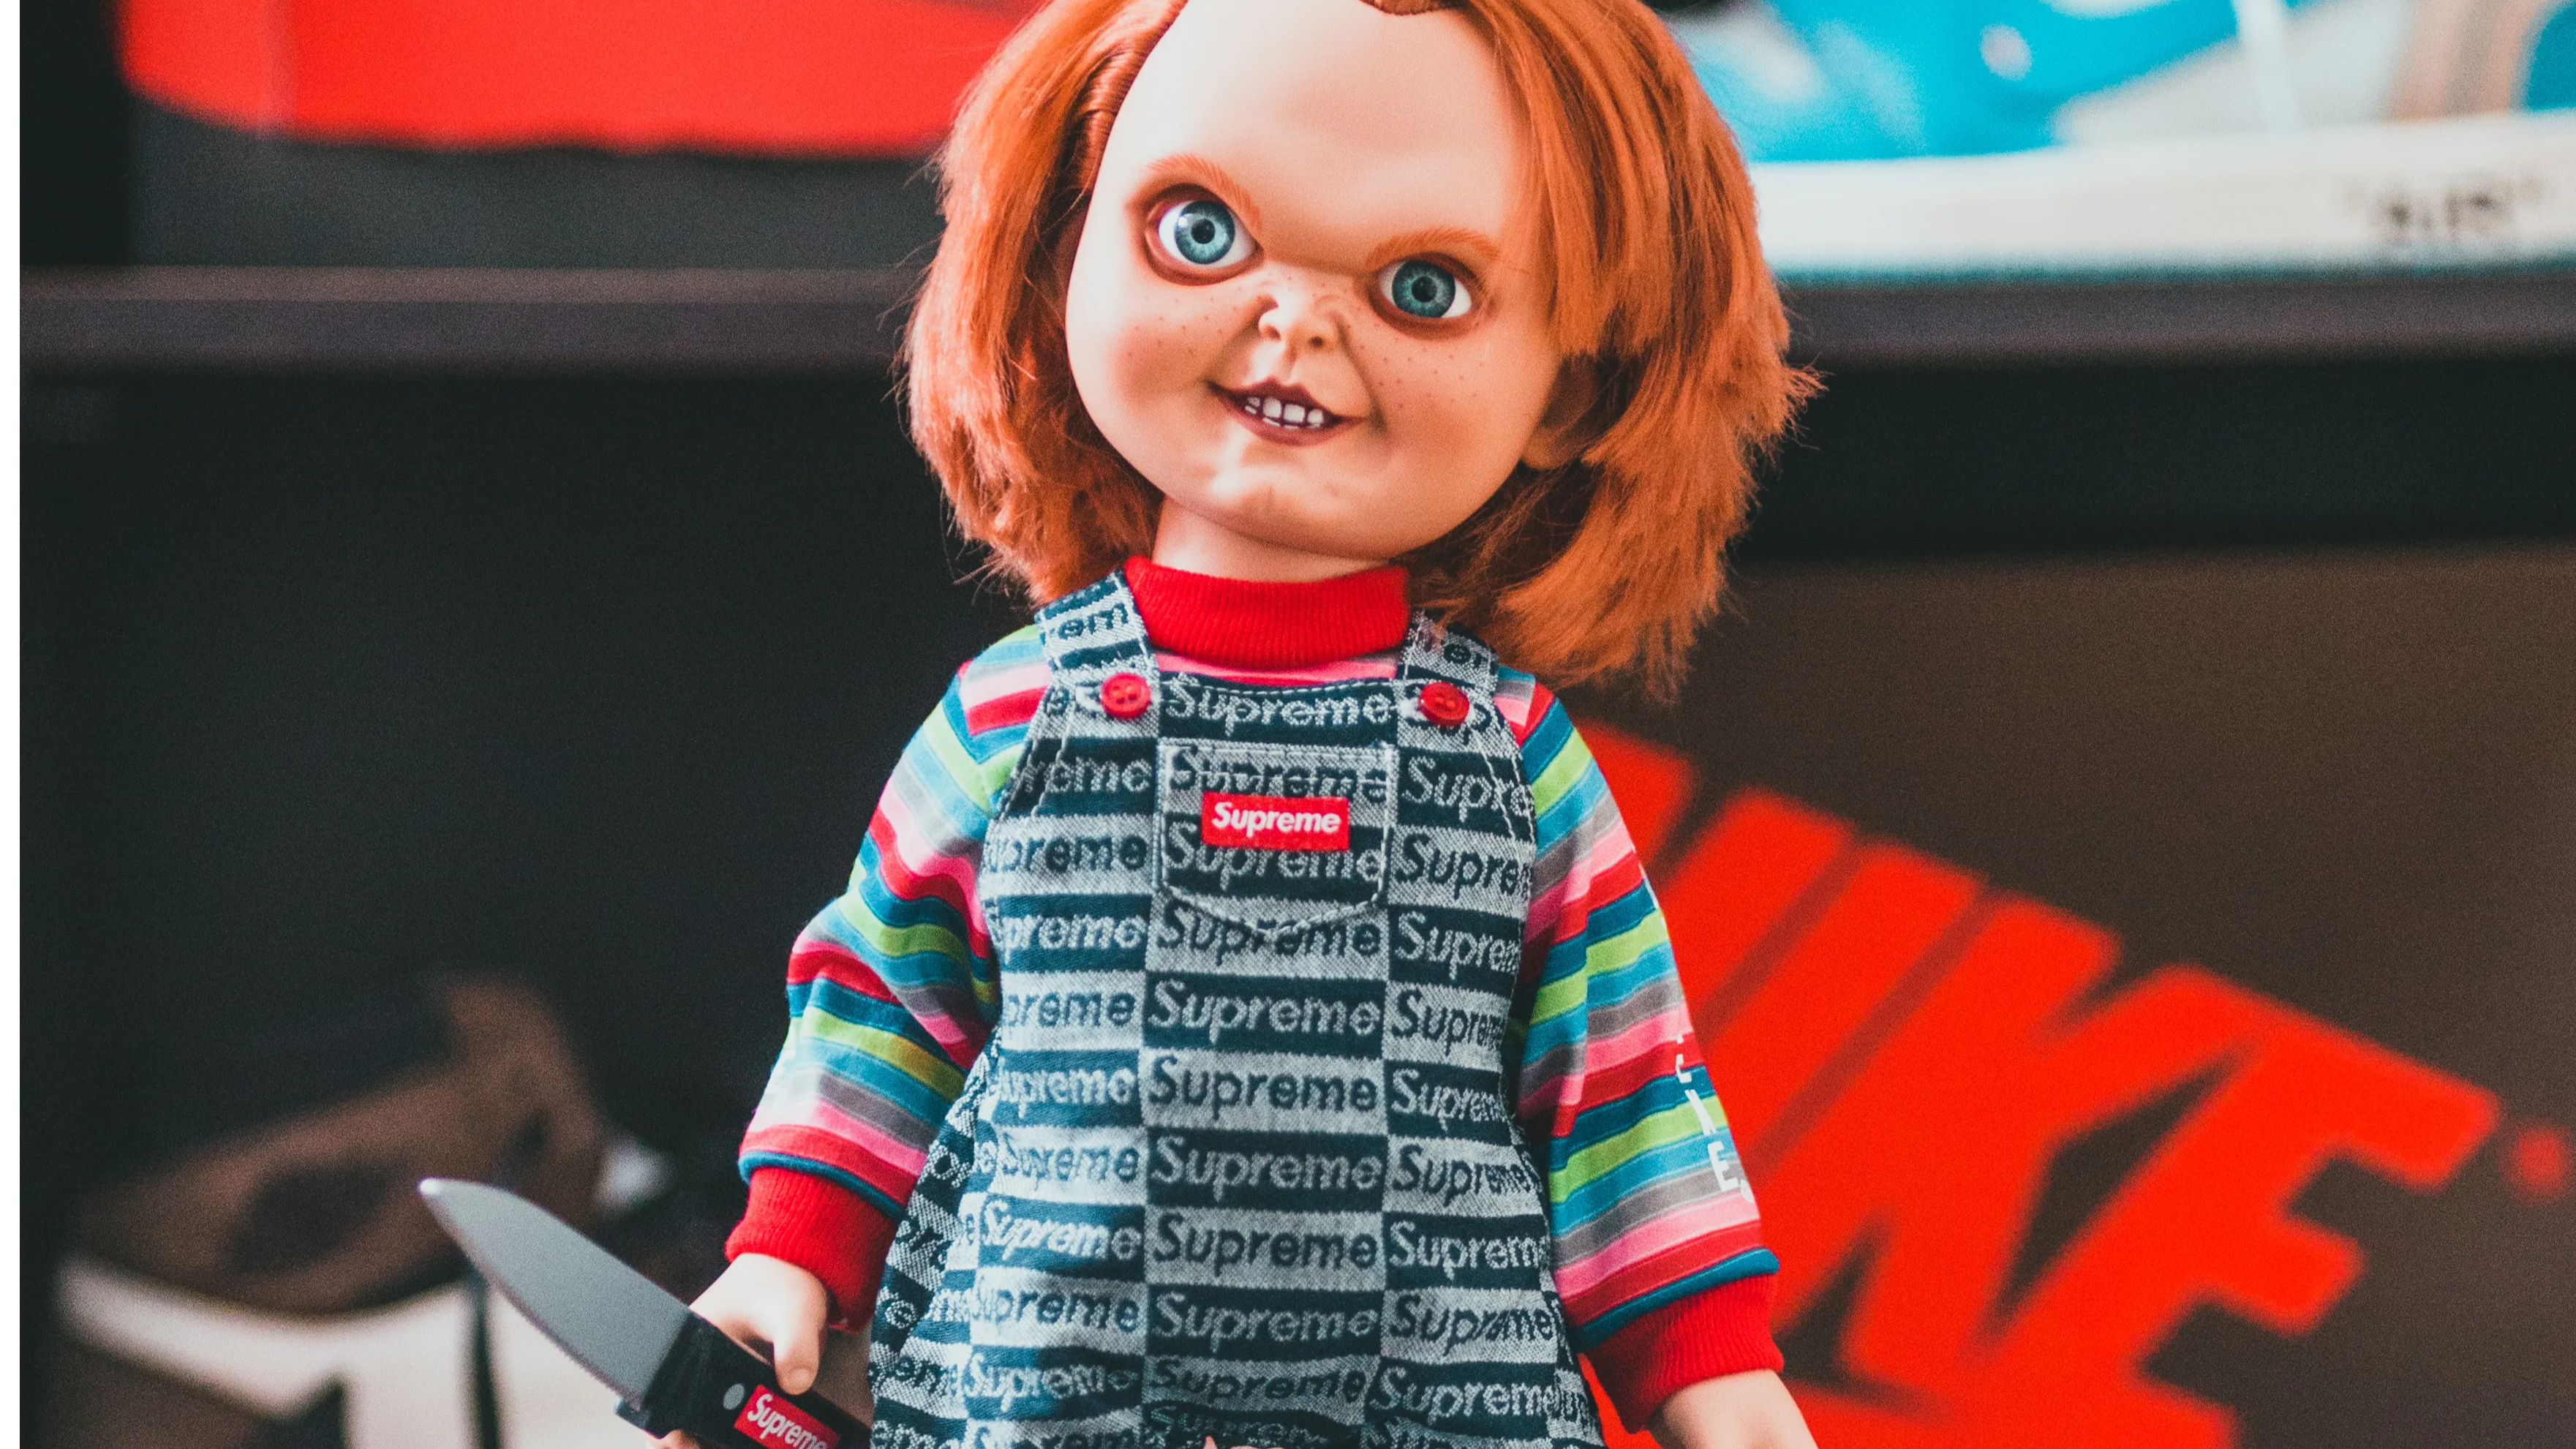 Authorities in Texas accidentally issue Amber Alert for ‘Chucky Doll’ and his son